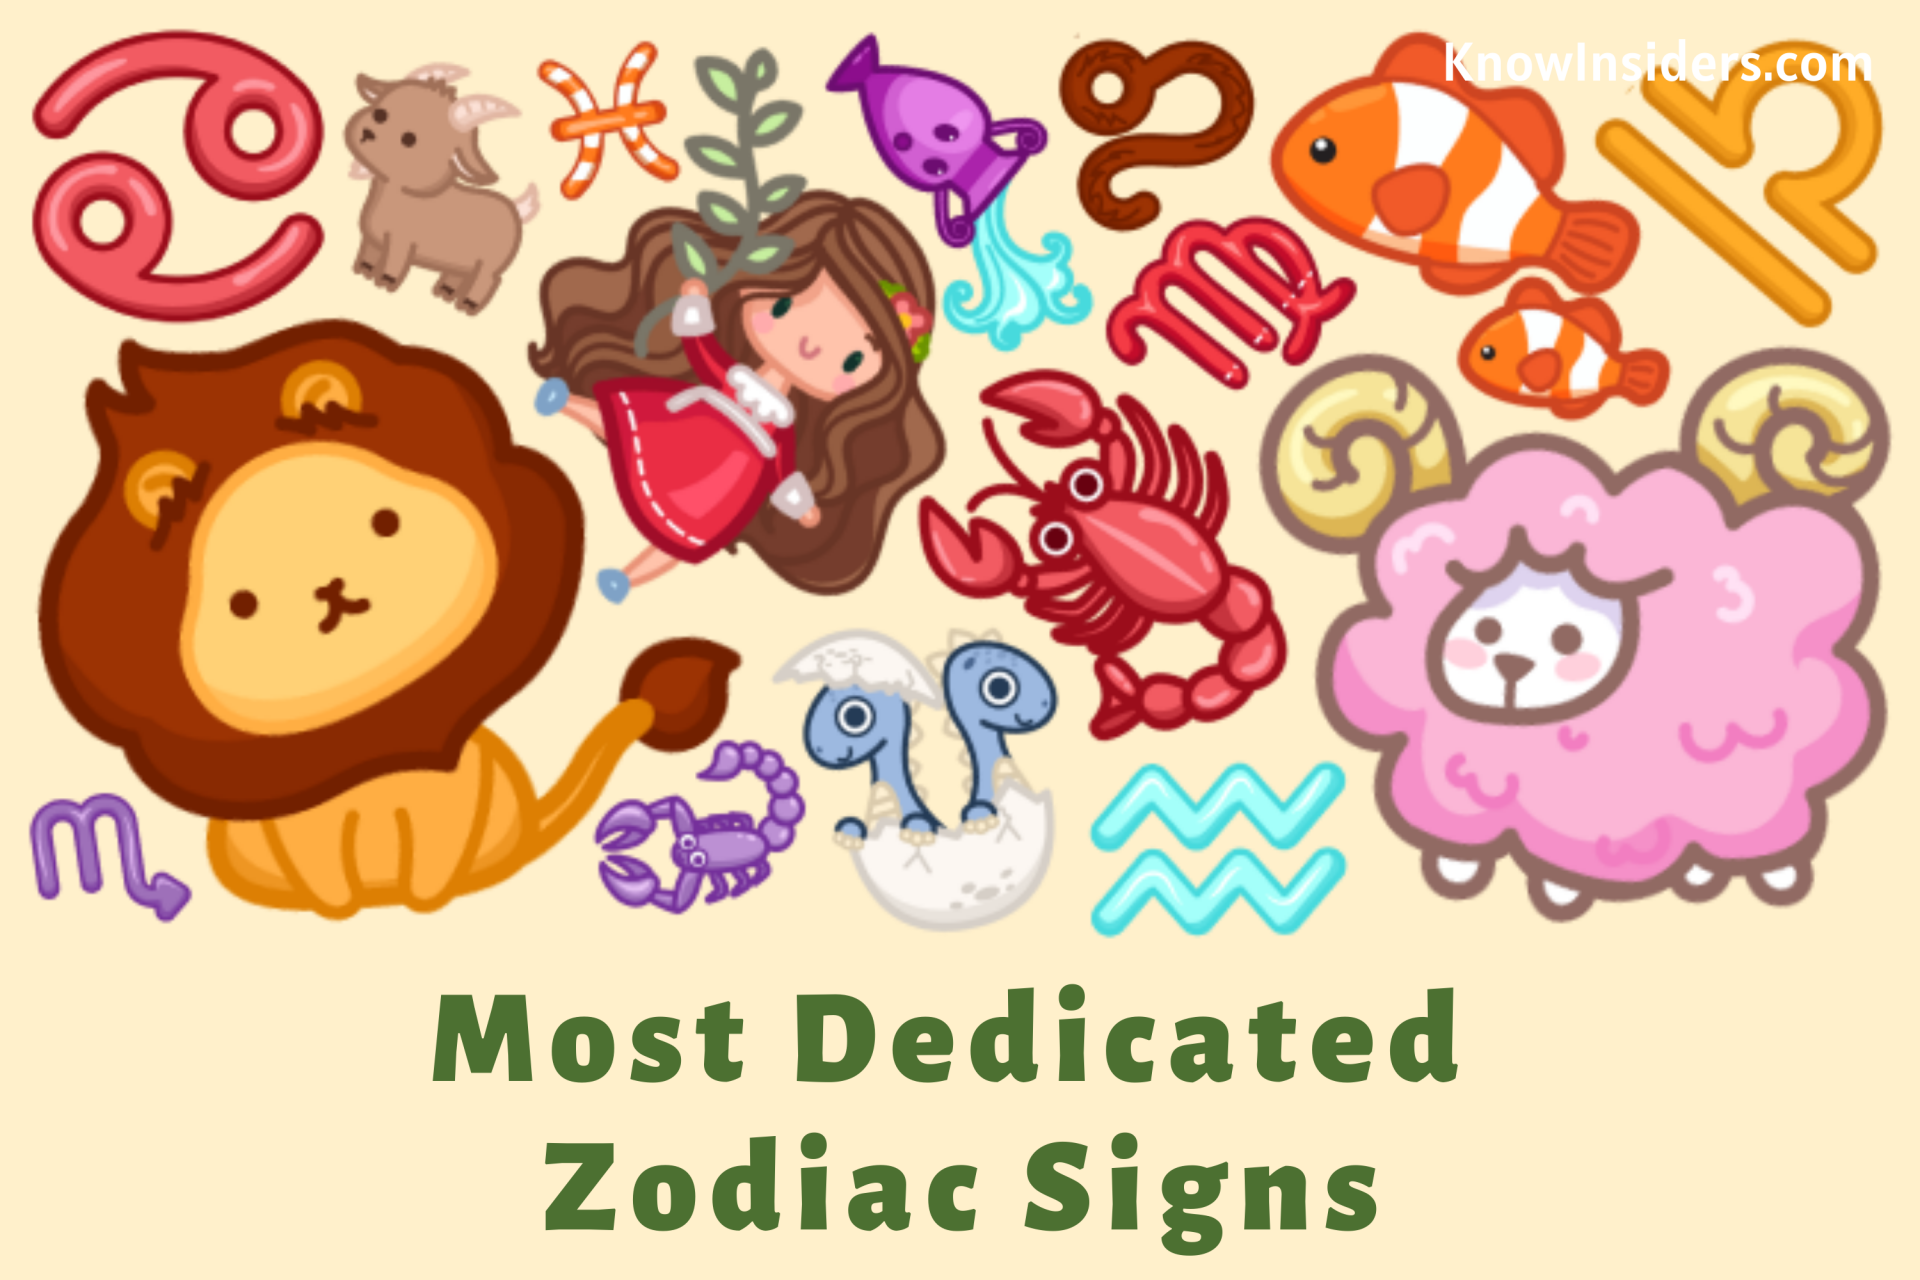 Top 5 Most Dedicated Zodiac Signs, Accoring to Astrology